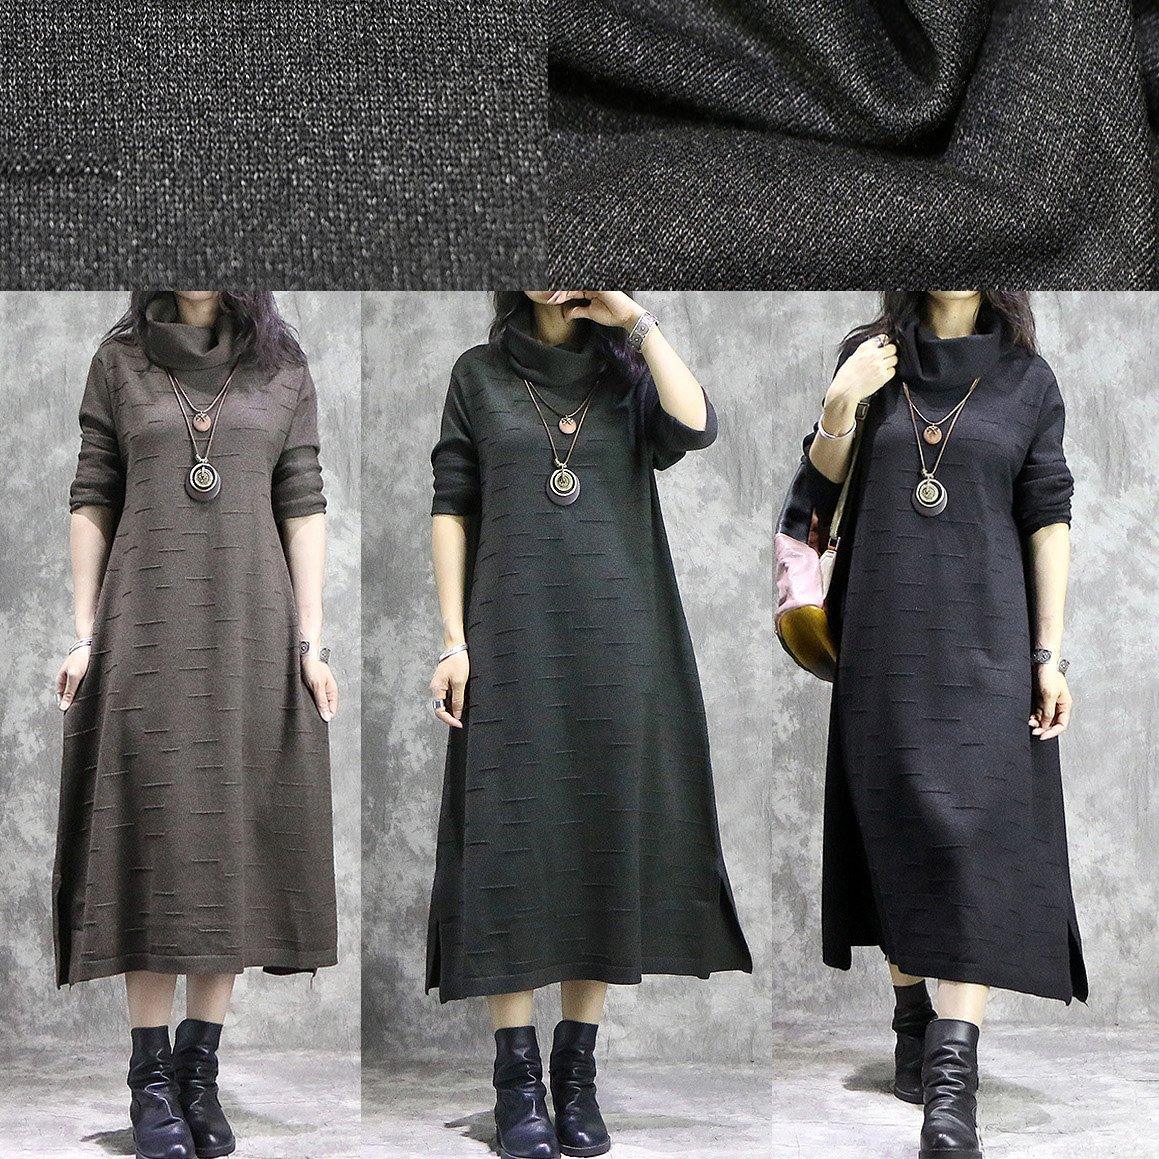 Oversized Sweater dress outfit thick khaki daily knit high neck dress - Omychic